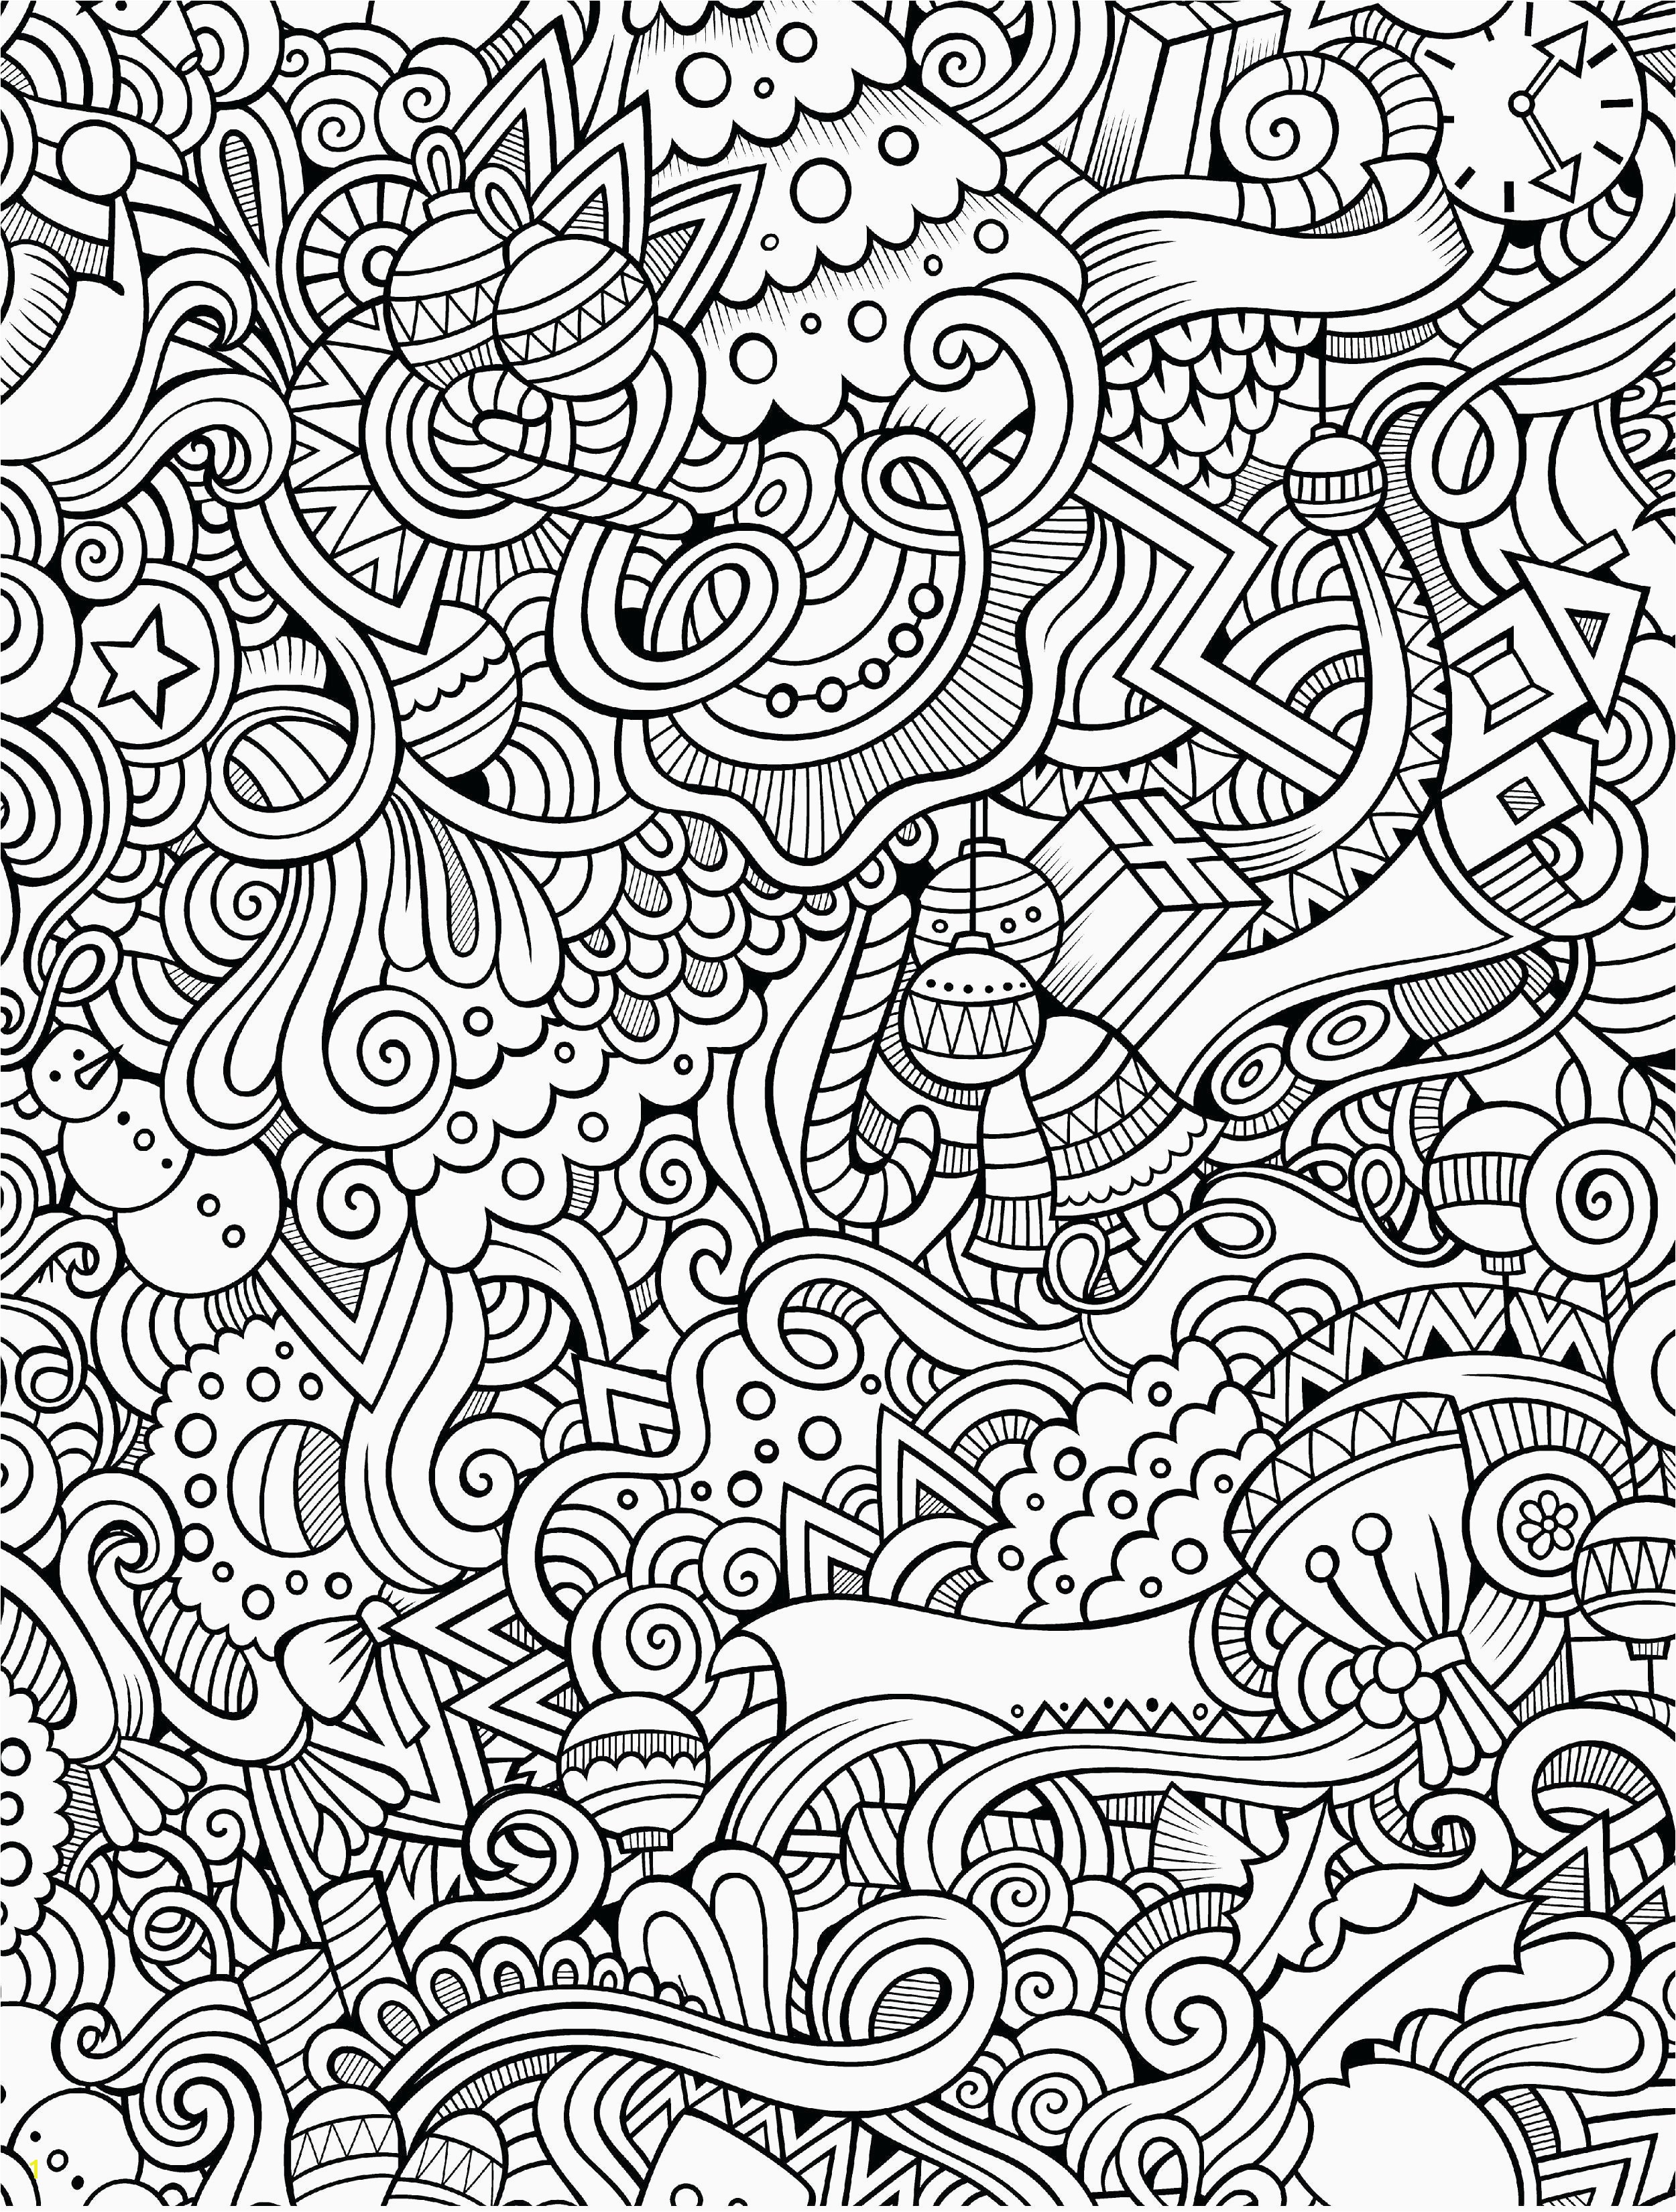 Printable Coloring Pages Hard Luxury Hard Coloring Pages Printable Free